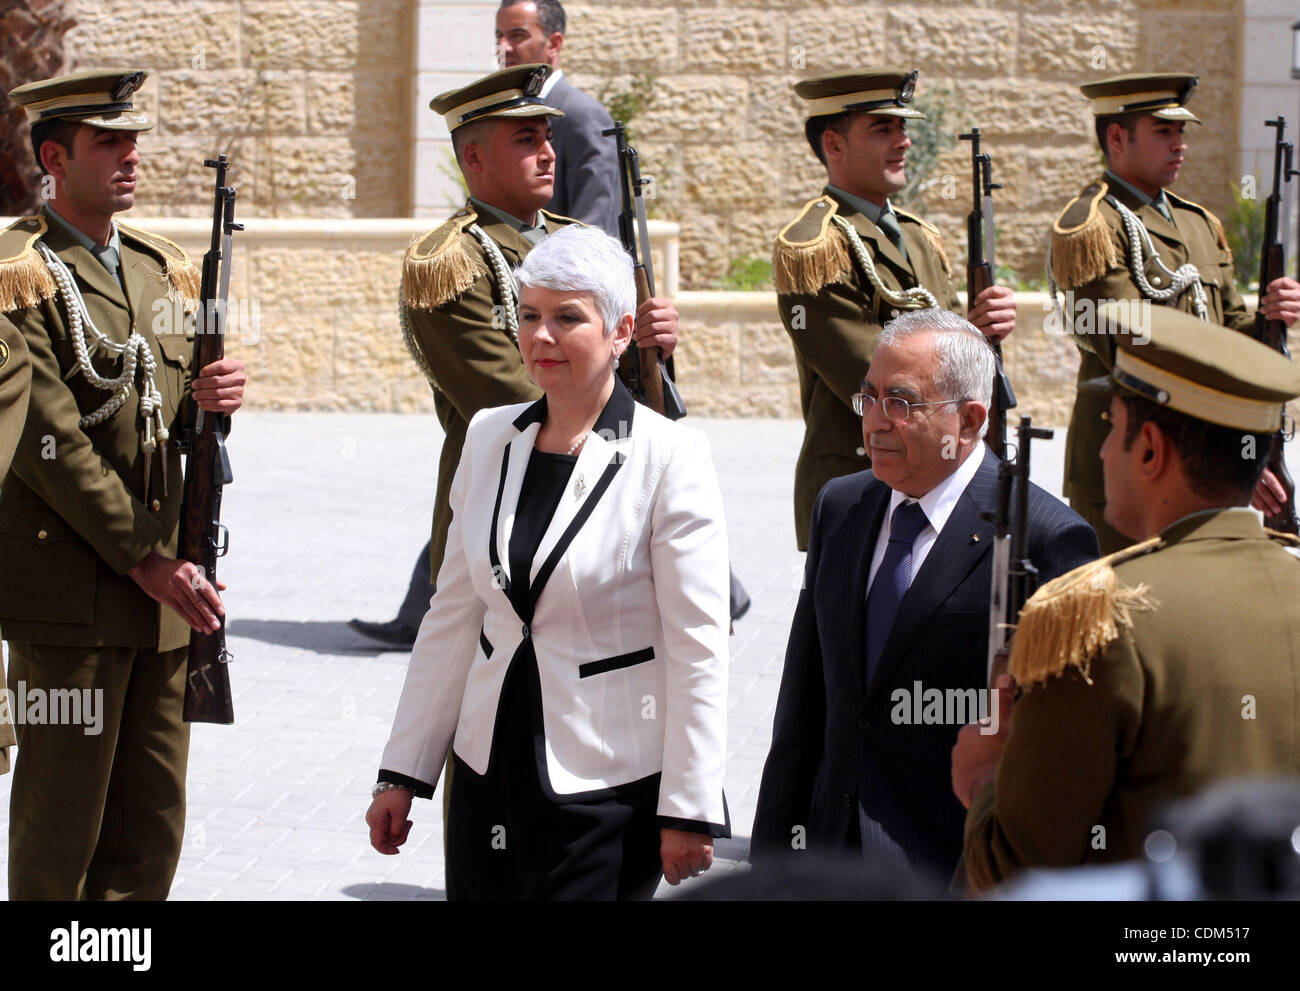 Palestinian Prime Minister Salam Fayyad  reviews honor guards with the Croatian counterpart Jadranka Kosor upon her arrival to the West Bank city of Ramallah, on March 31,2011. Photo by Issam Rimawi Stock Photo